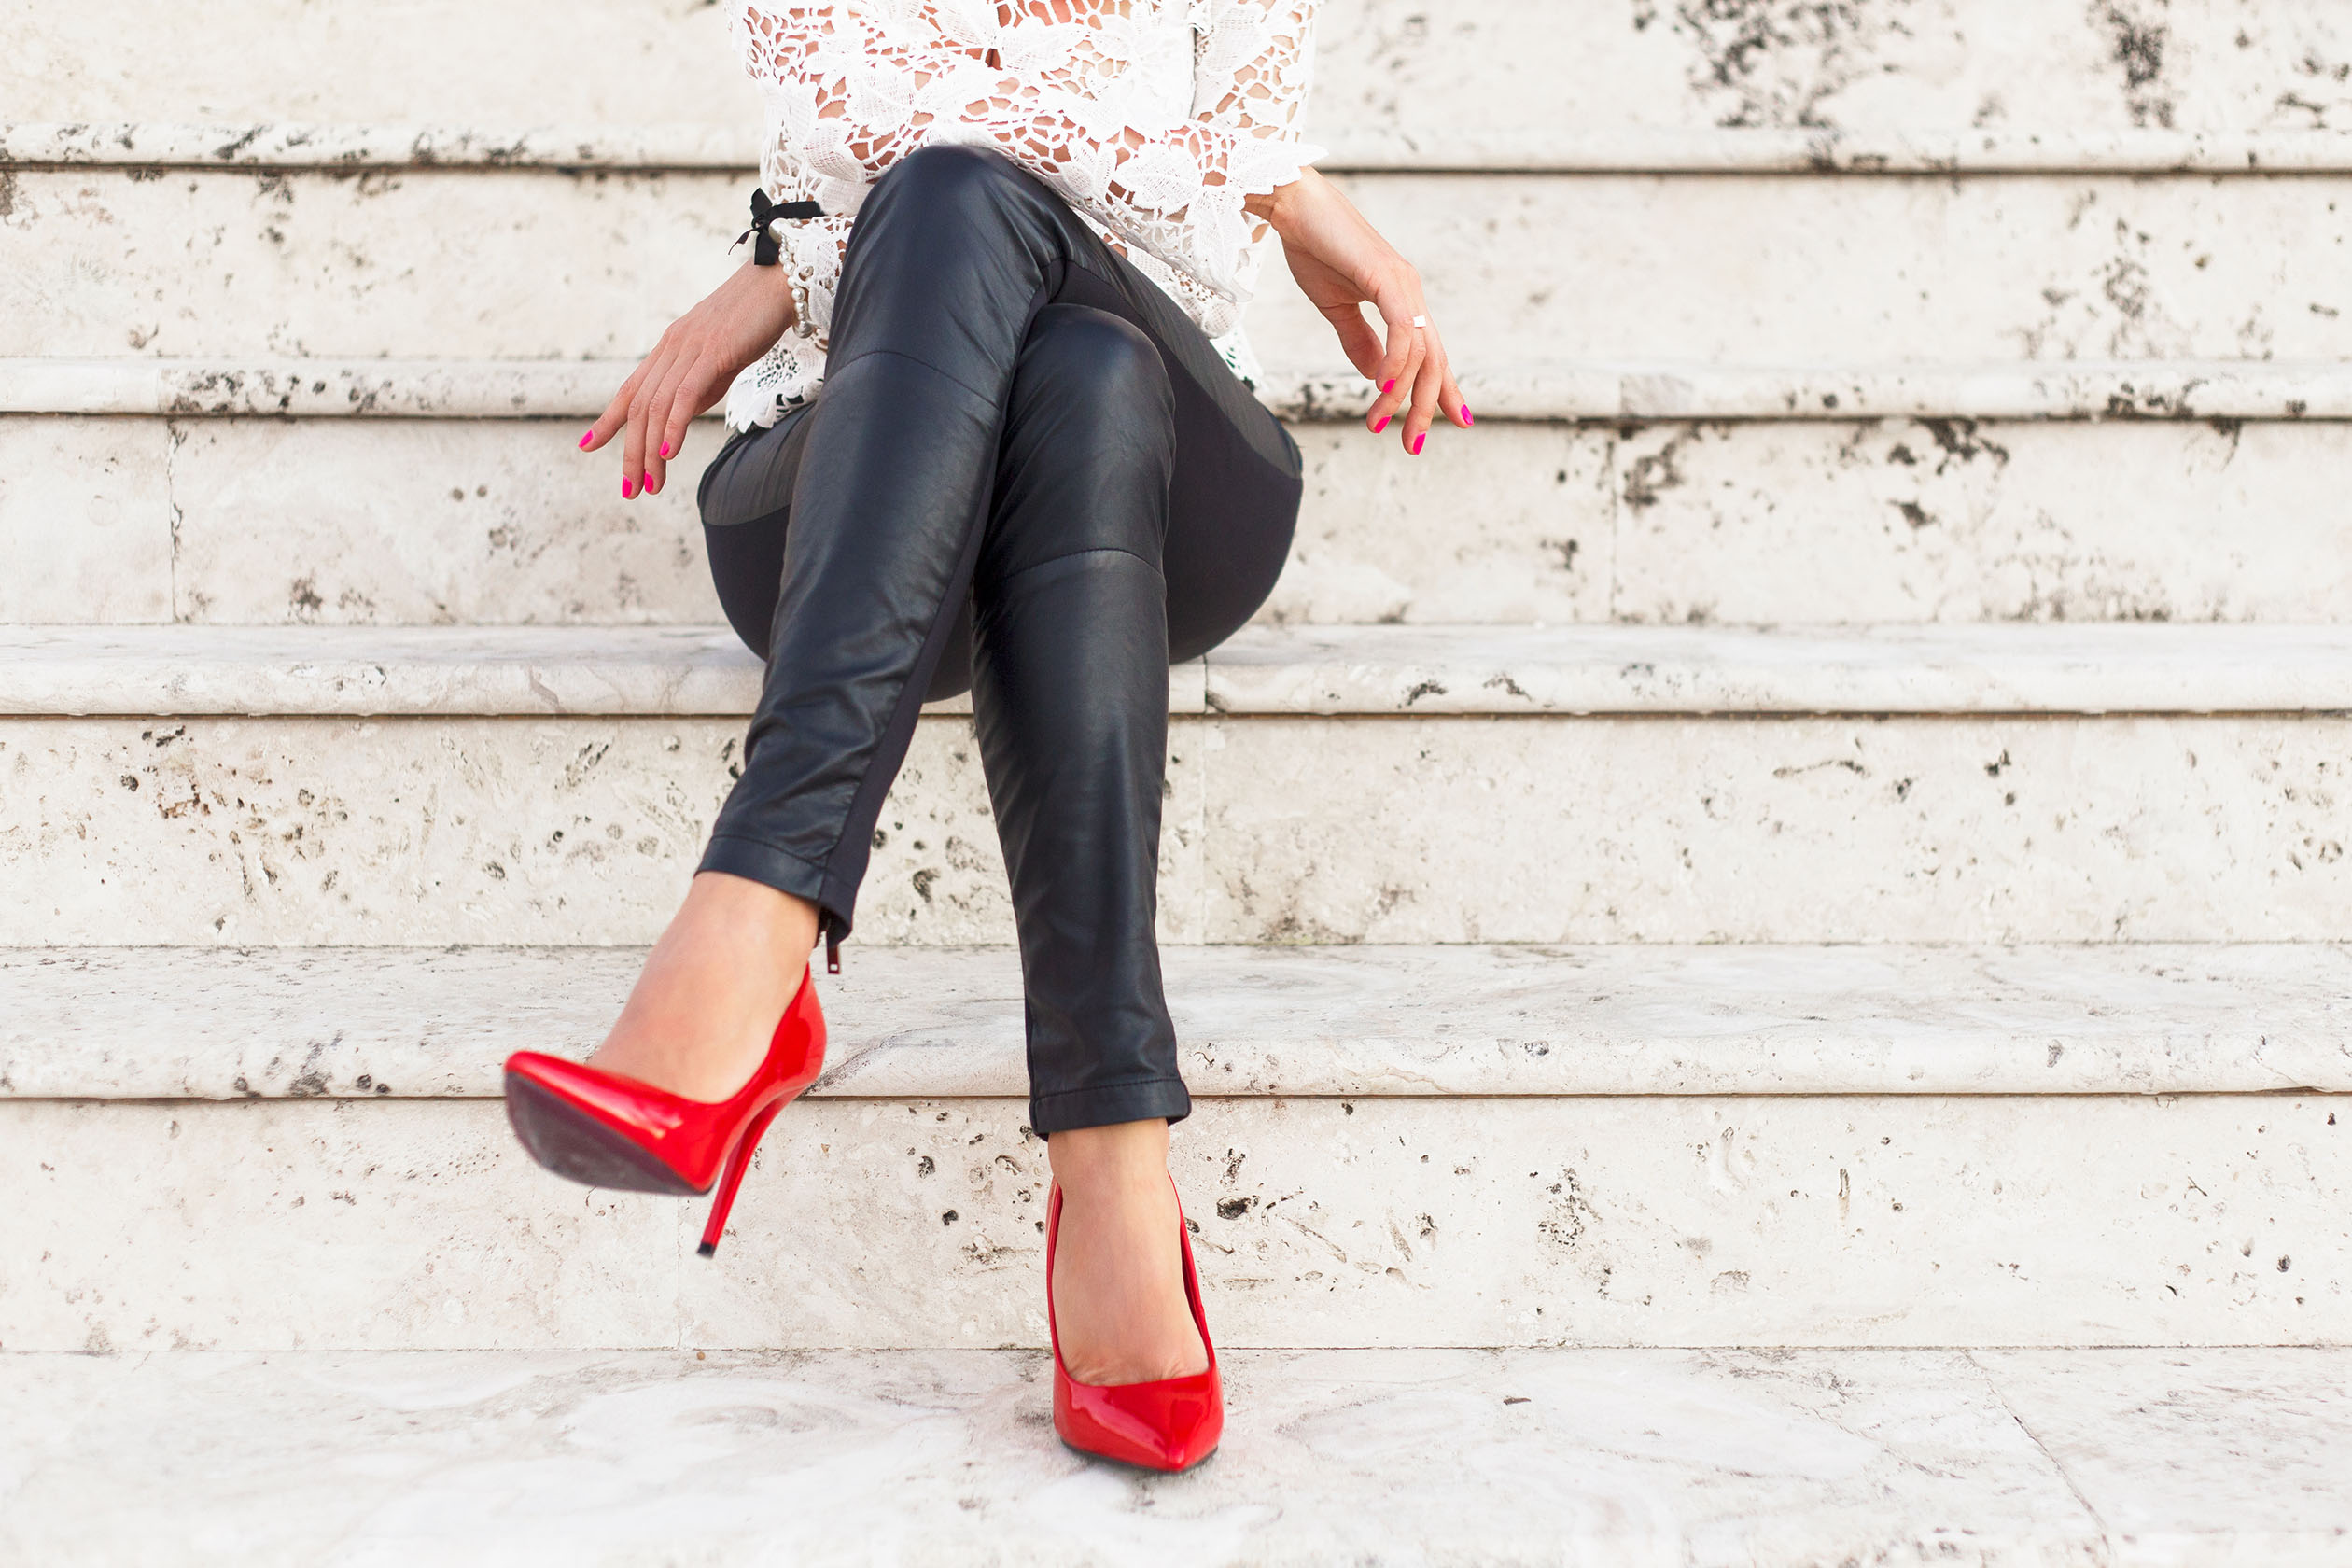 https://www.blissmark.com/wp-content/uploads/sites/3/2021/04/faux-leather-leggings-and-red-heels.jpg?fit=1024%2C1024&p=1